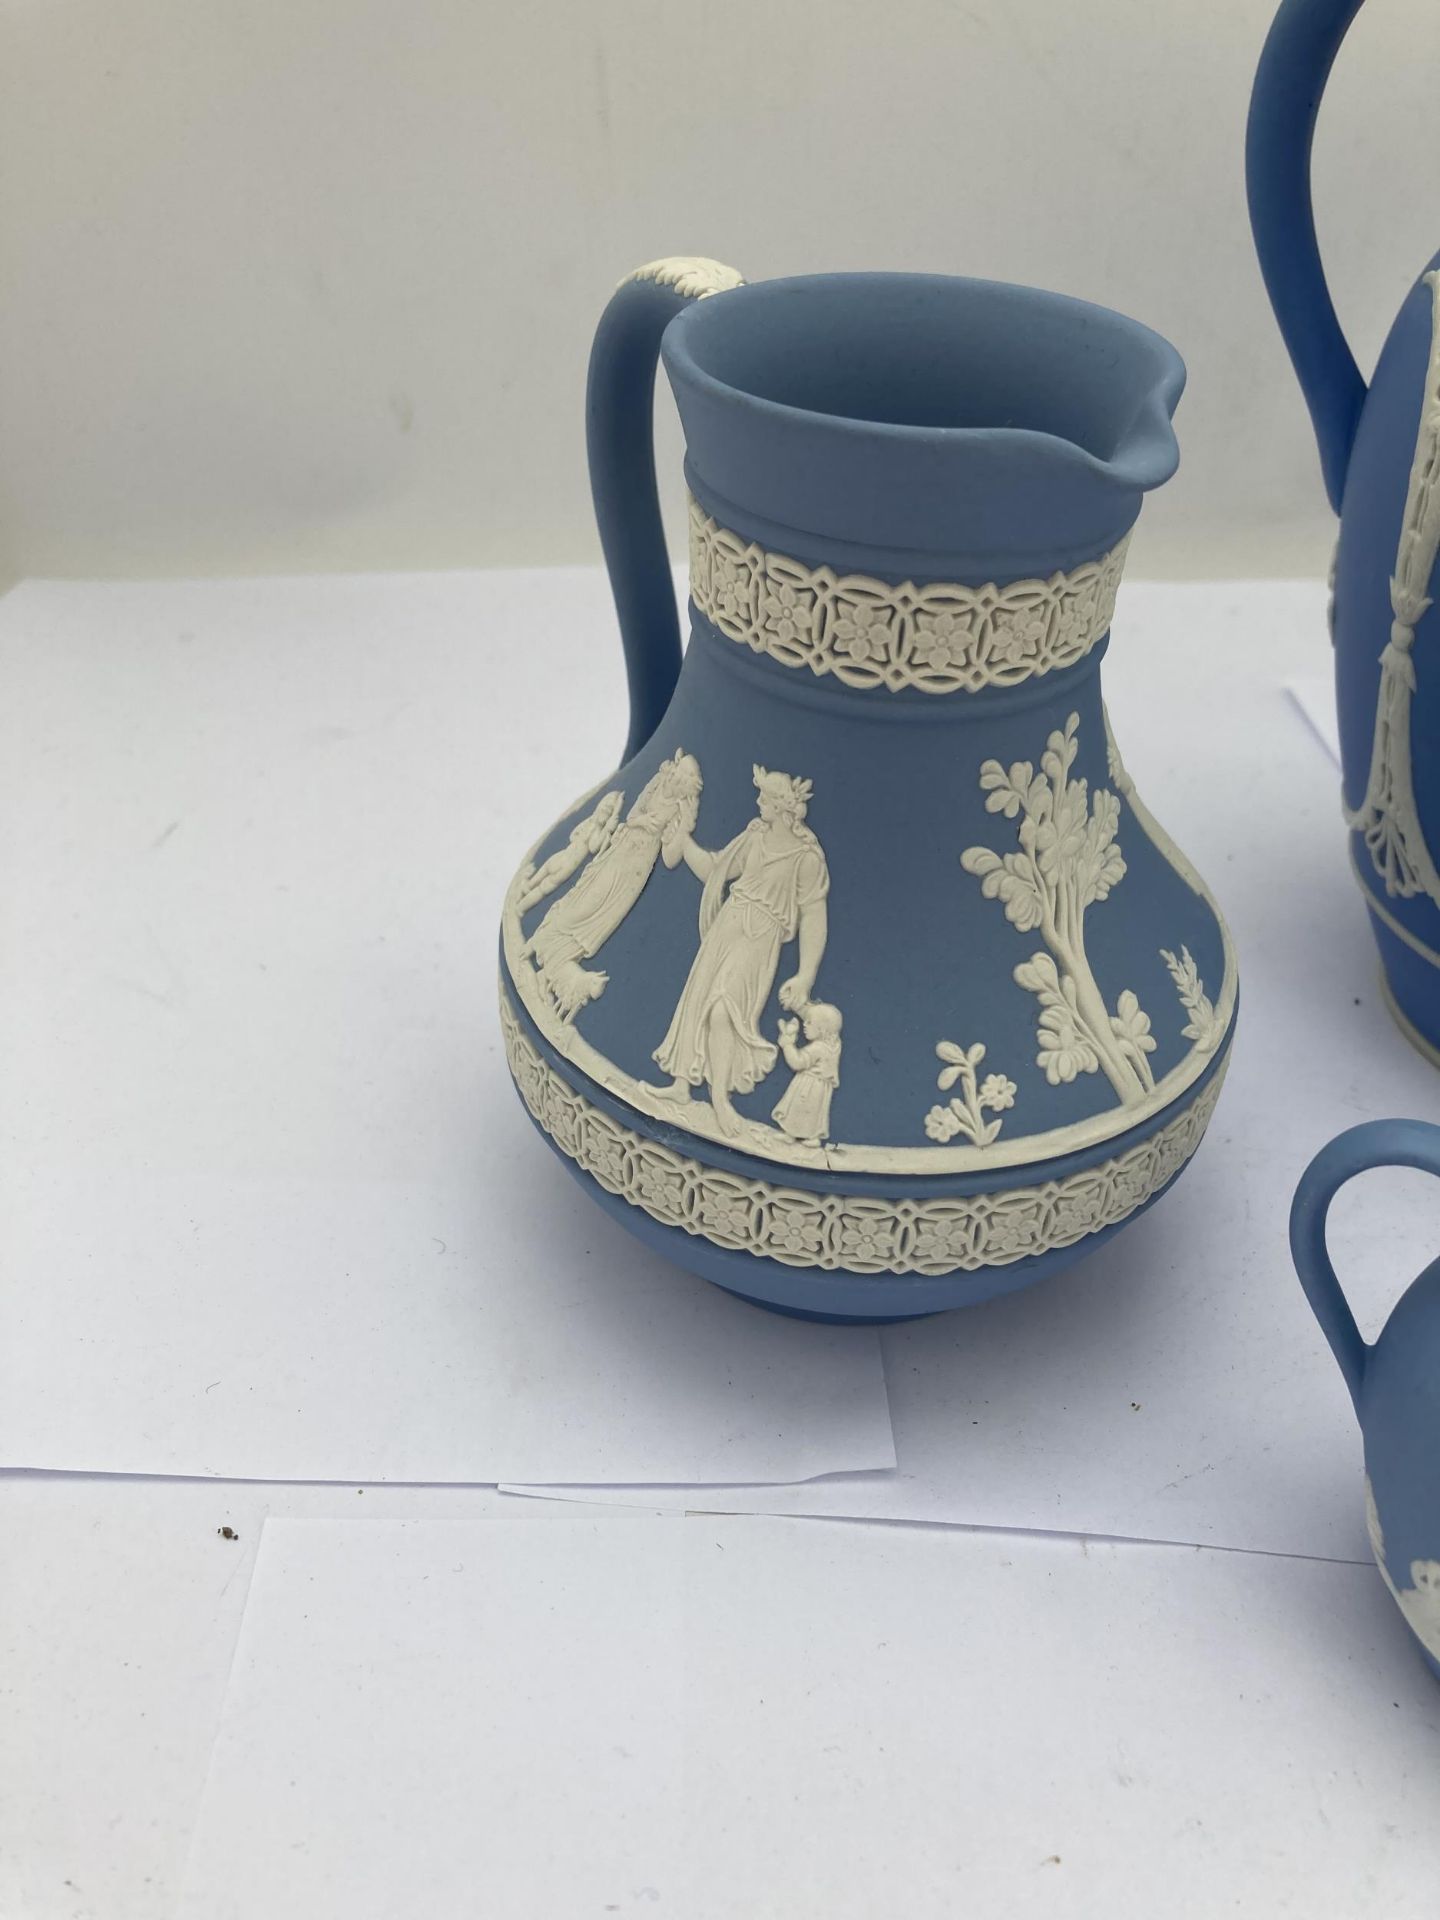 A GROUP OF THREE JASPERWARE ITEMS - TWO WEDGWOOD JUGS AND FURTHER JUG - Image 3 of 4